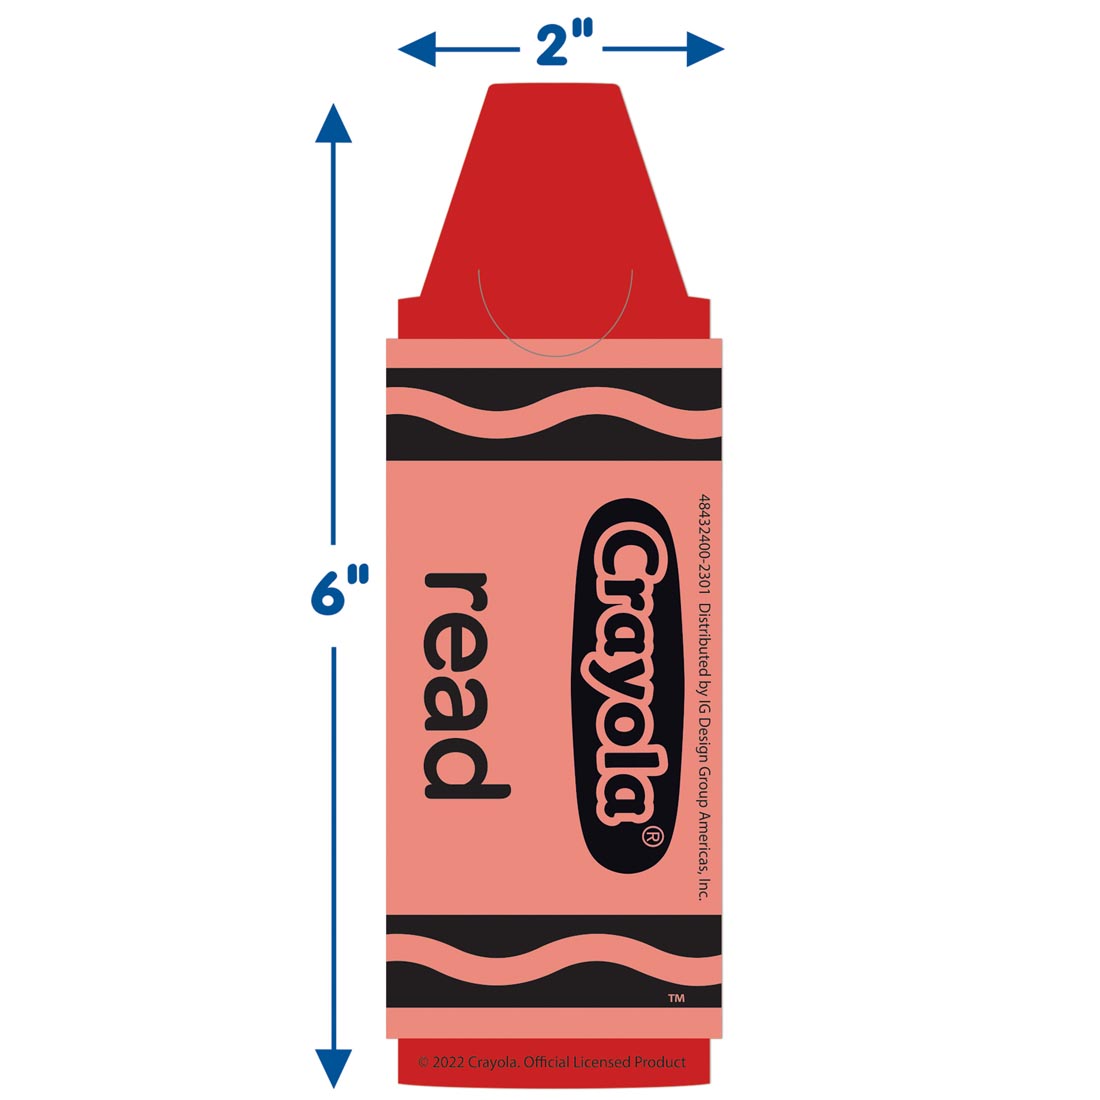 Red Crayon Bookmark From The Crayola Collection By Eureka labeled with the dimensions 2" and 6"